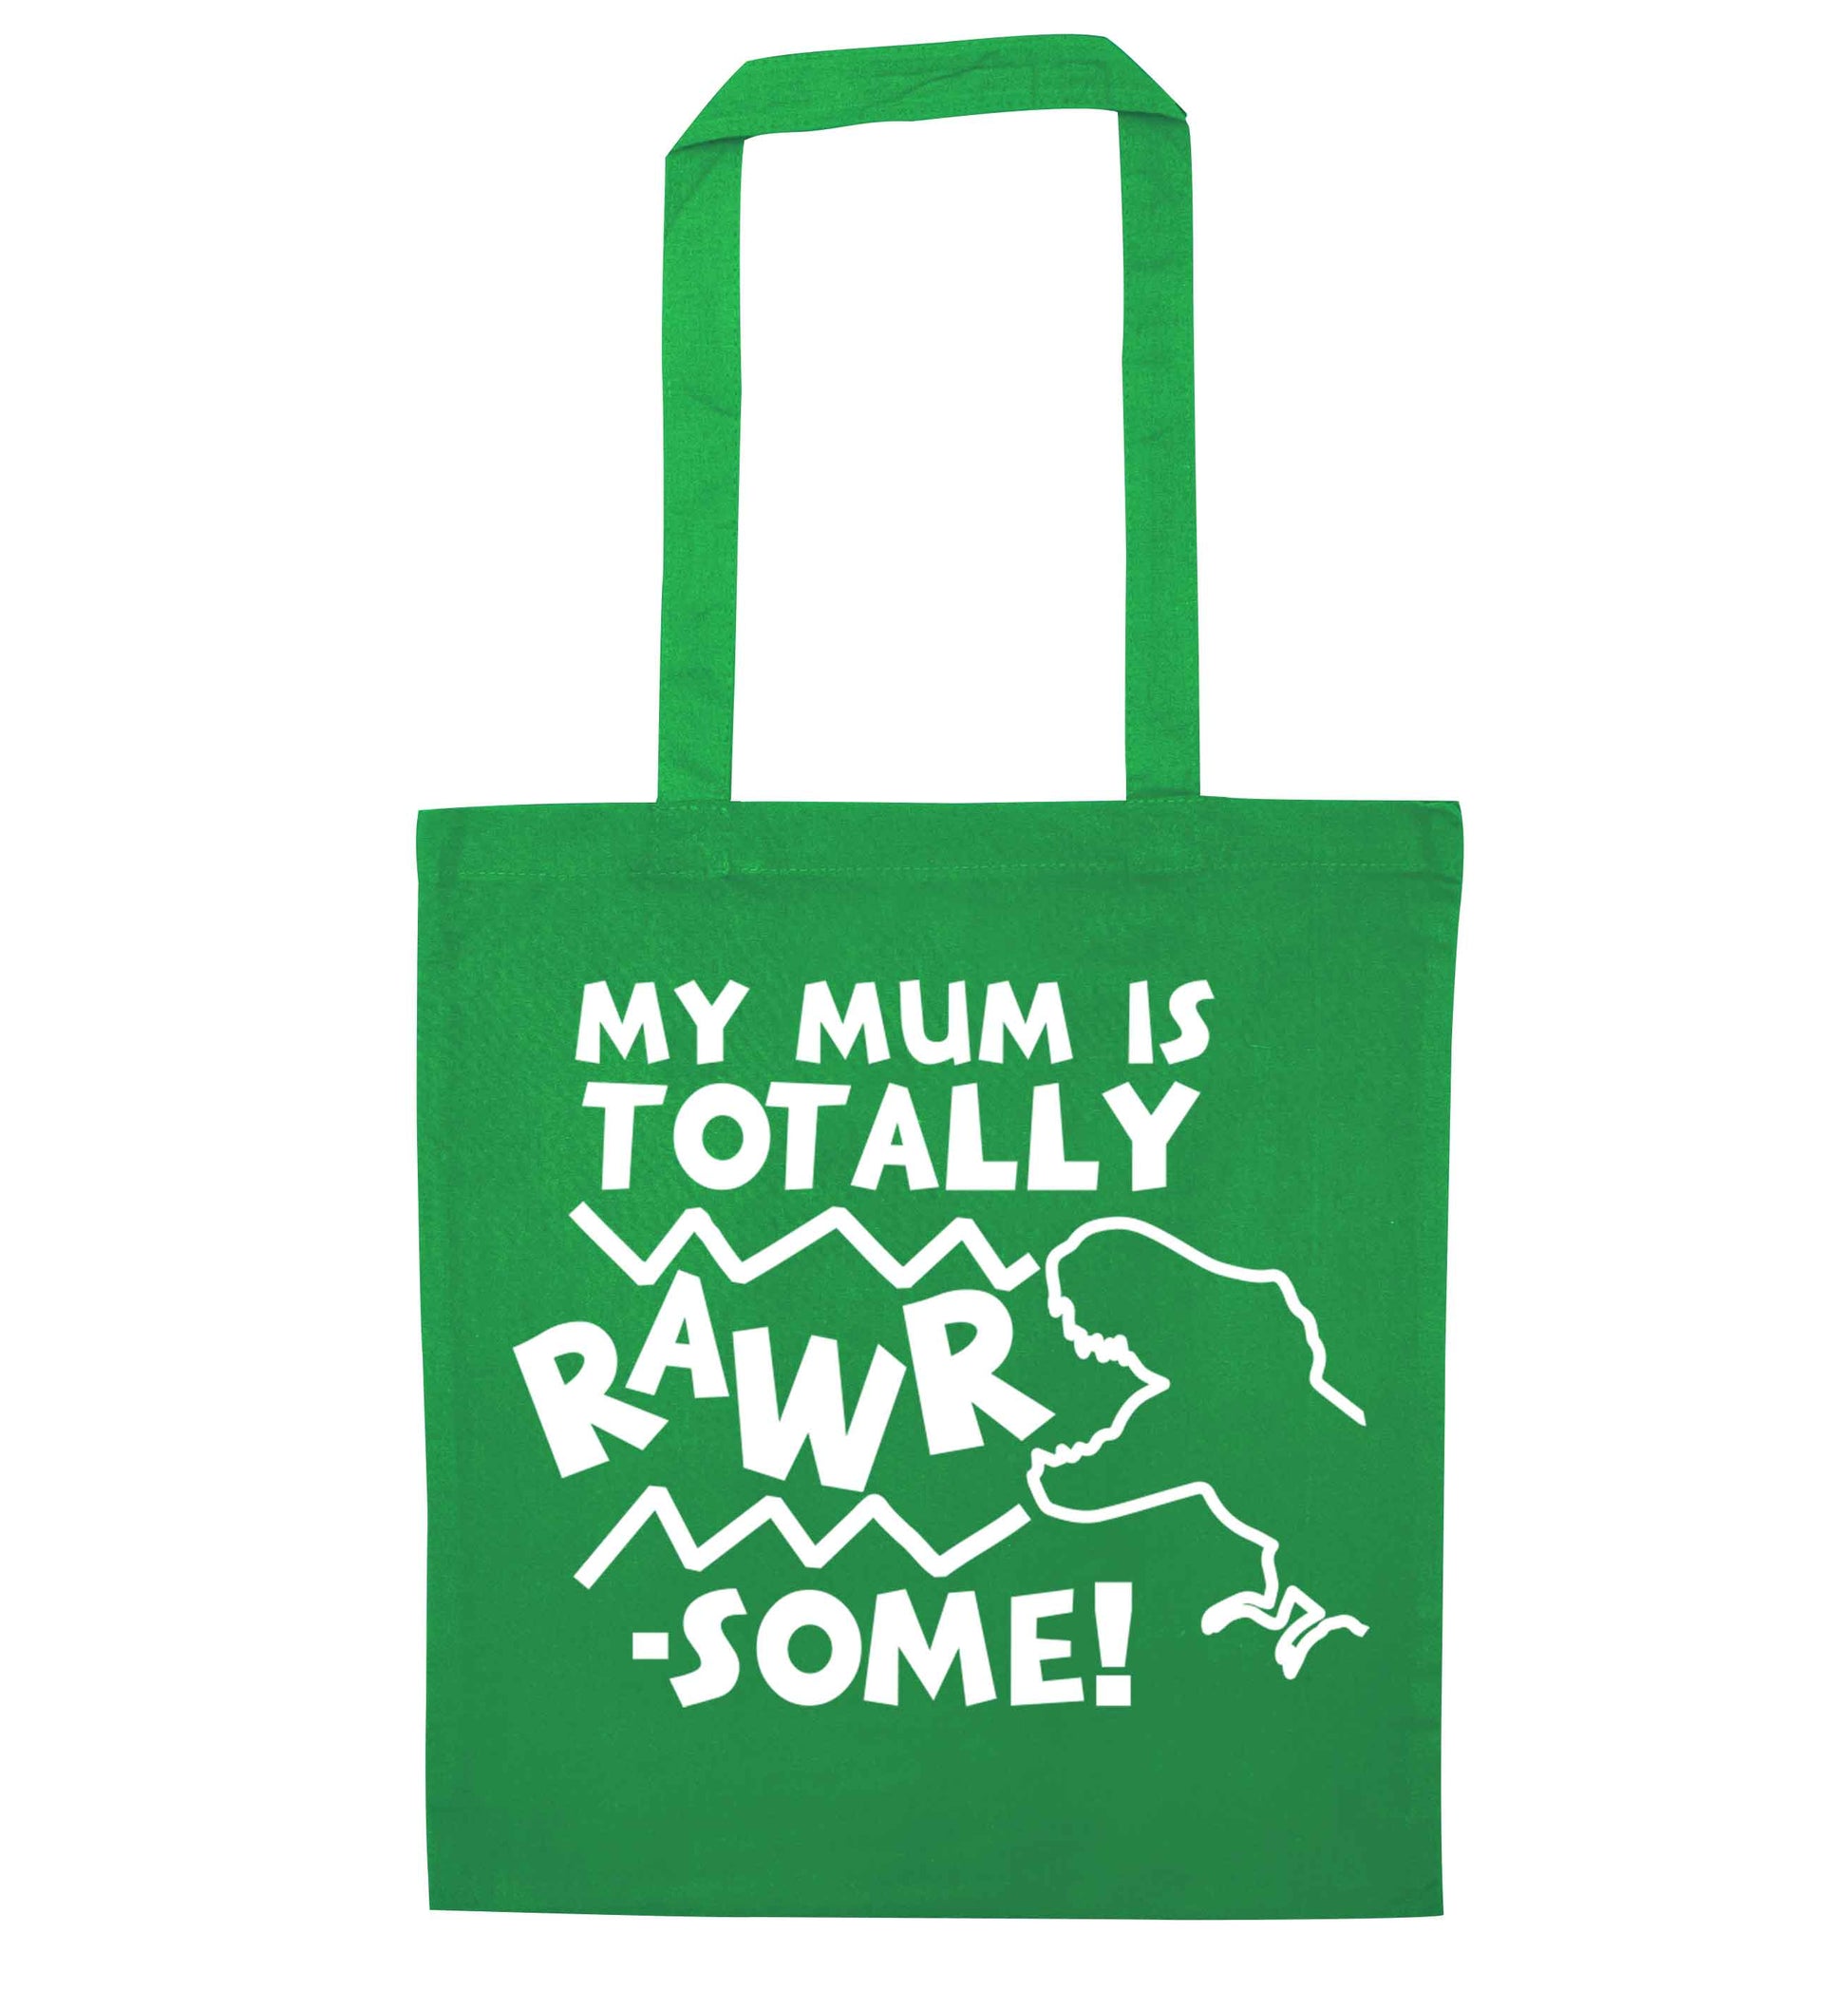 My mum is totally rawrsome green tote bag